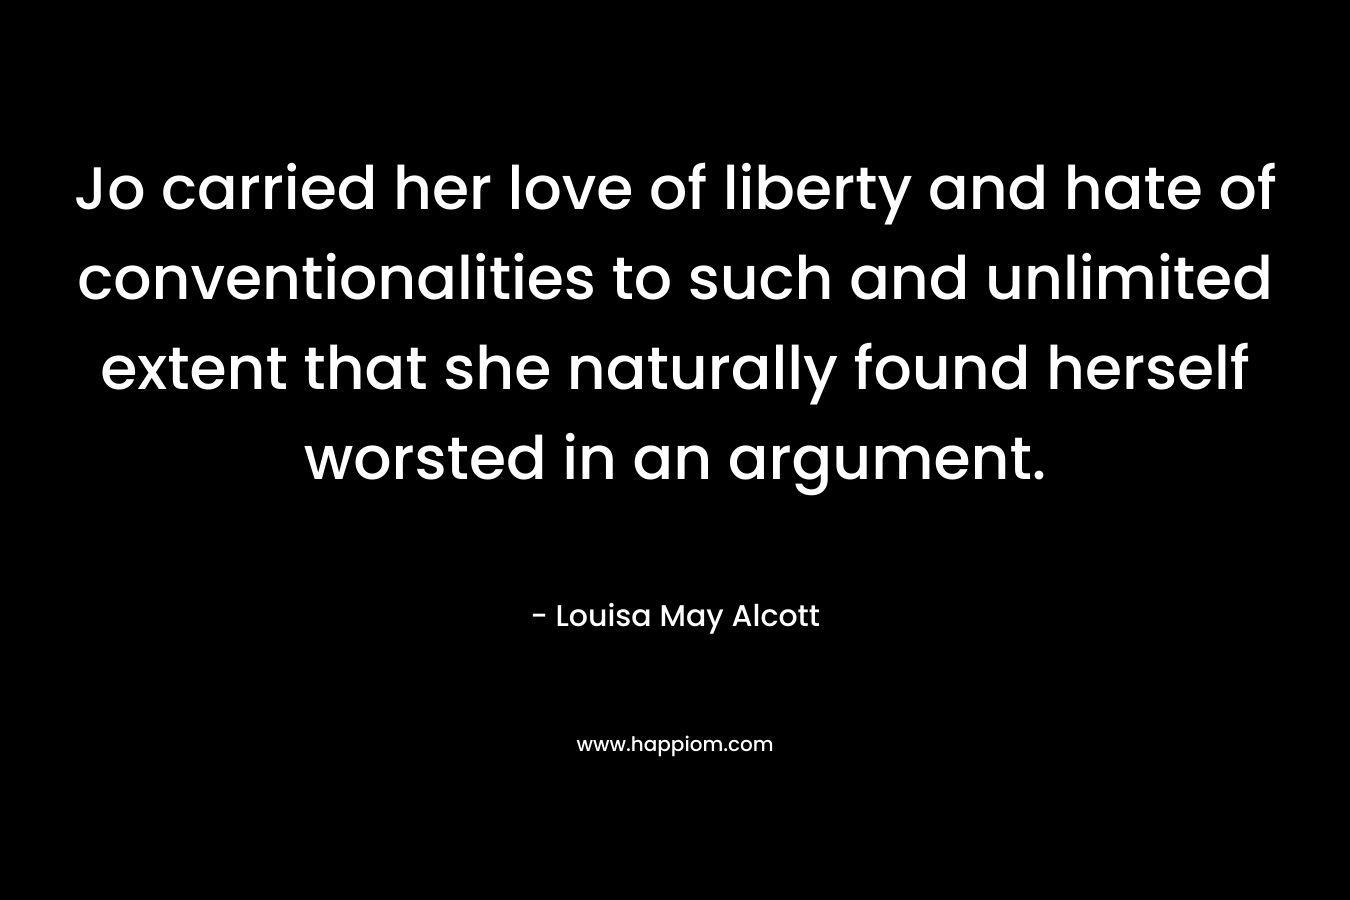 Jo carried her love of liberty and hate of conventionalities to such and unlimited extent that she naturally found herself worsted in an argument. – Louisa May Alcott